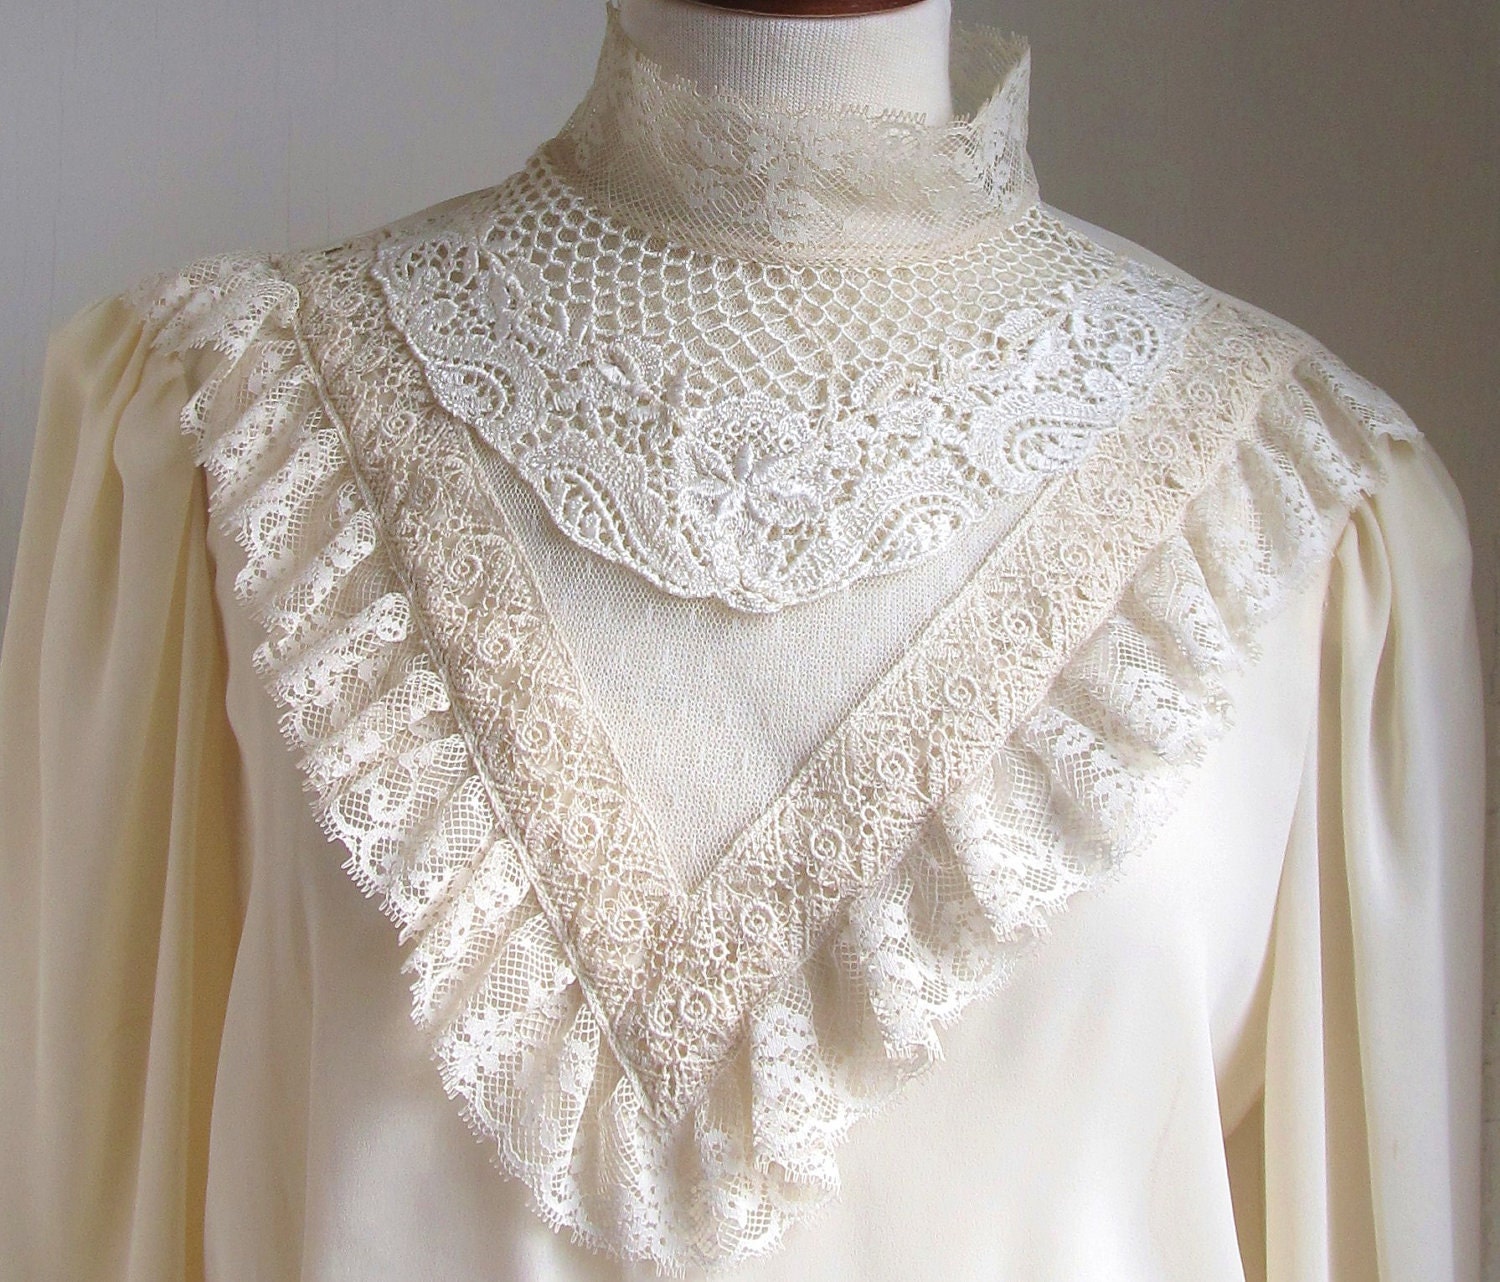 Vintage Victorian Style Lace High Collar Blouse S M Crochet